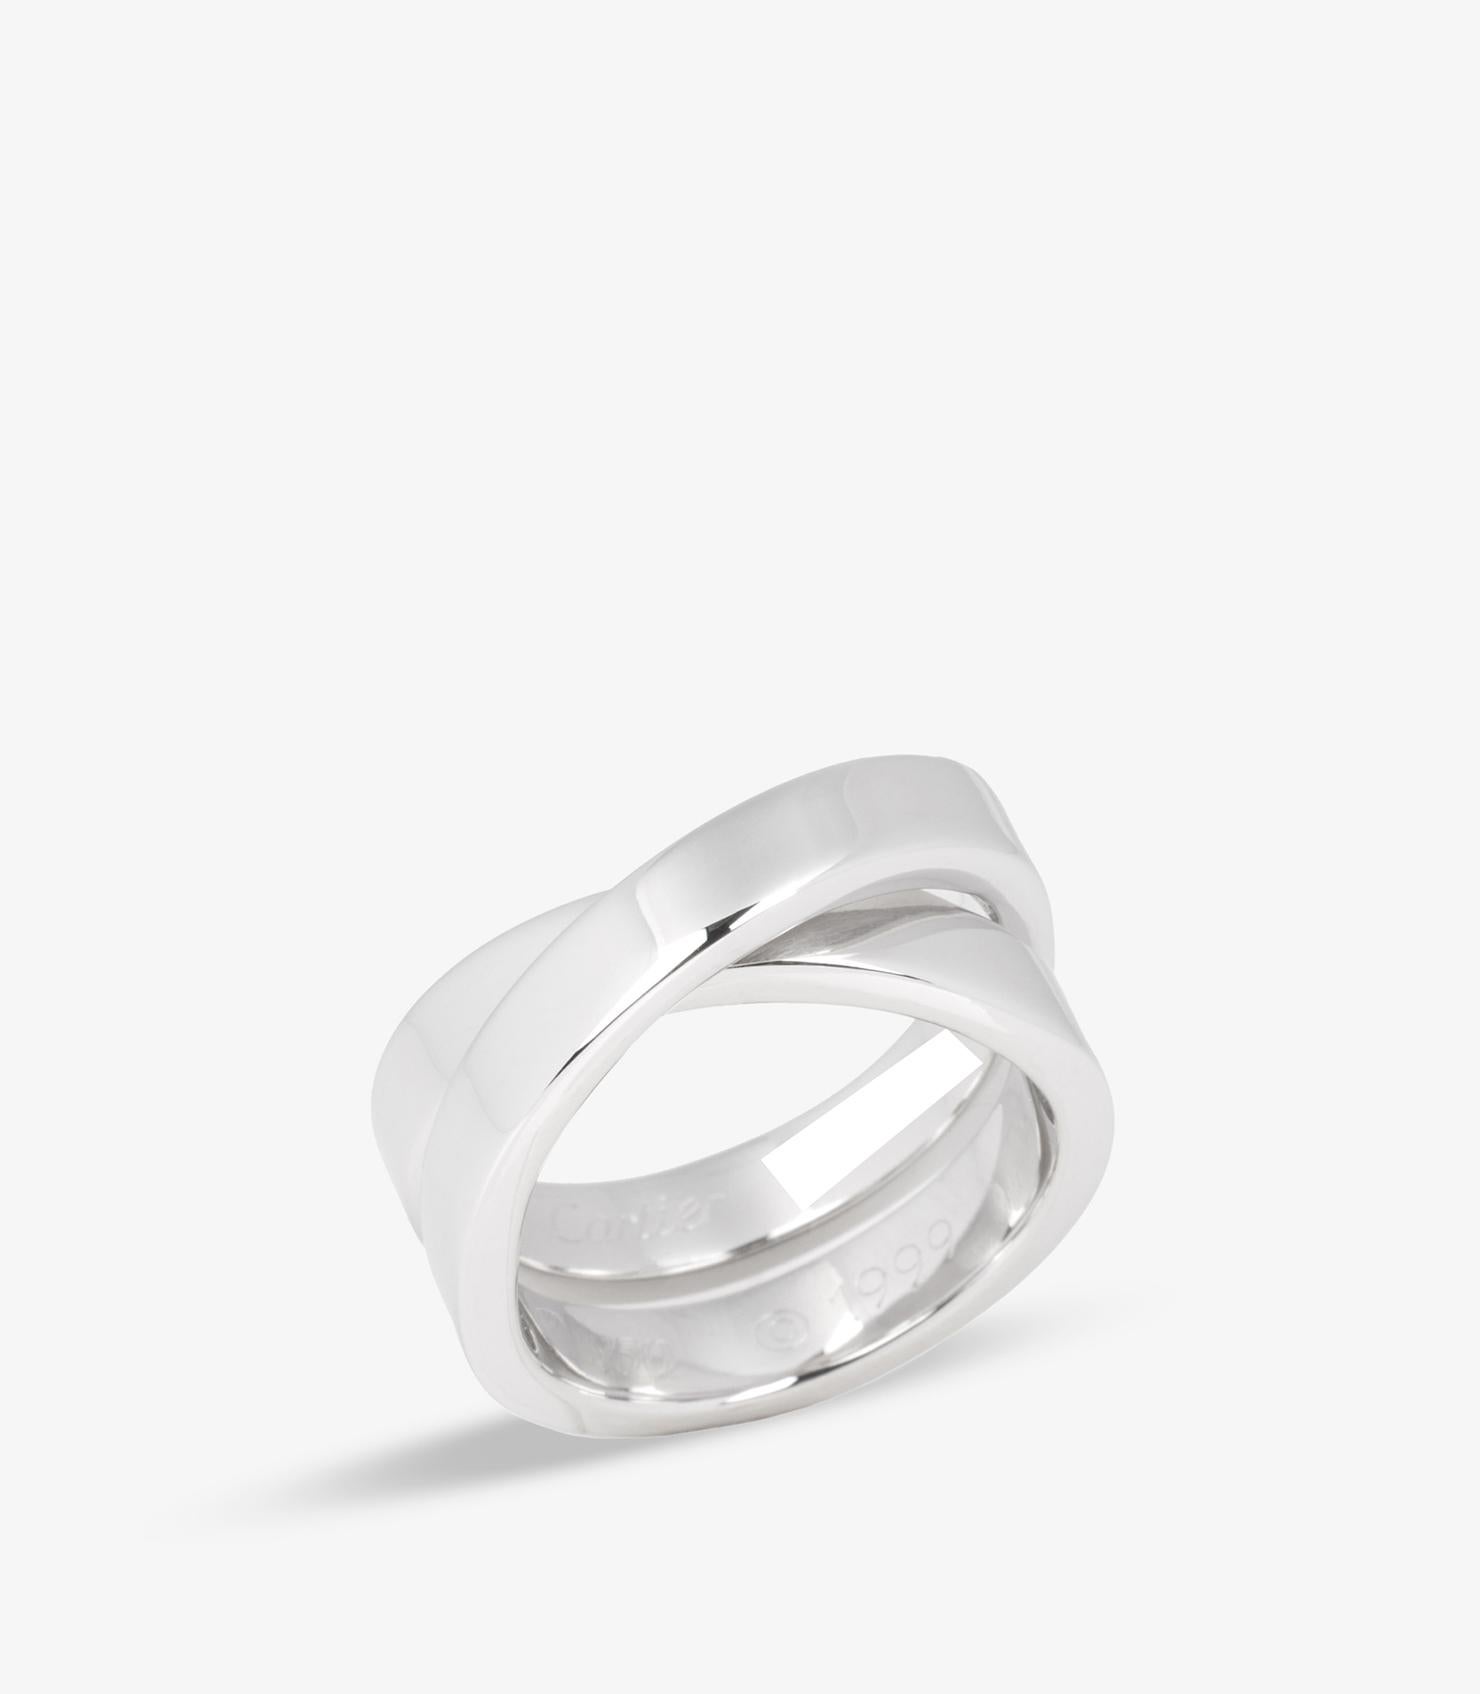 Cartier 18ct White Gold Crossover Nouvelle Vague Ring

Brand- Cartier
Model- Nouvelle Vague Ring
Product Type- Ring
Serial Number- J*****
Material(s)- 18ct White Gold
UK Ring Size- L 1/2
EU Ring Size- 52
US Ring Size- 6
Resizing Possible- No

Band